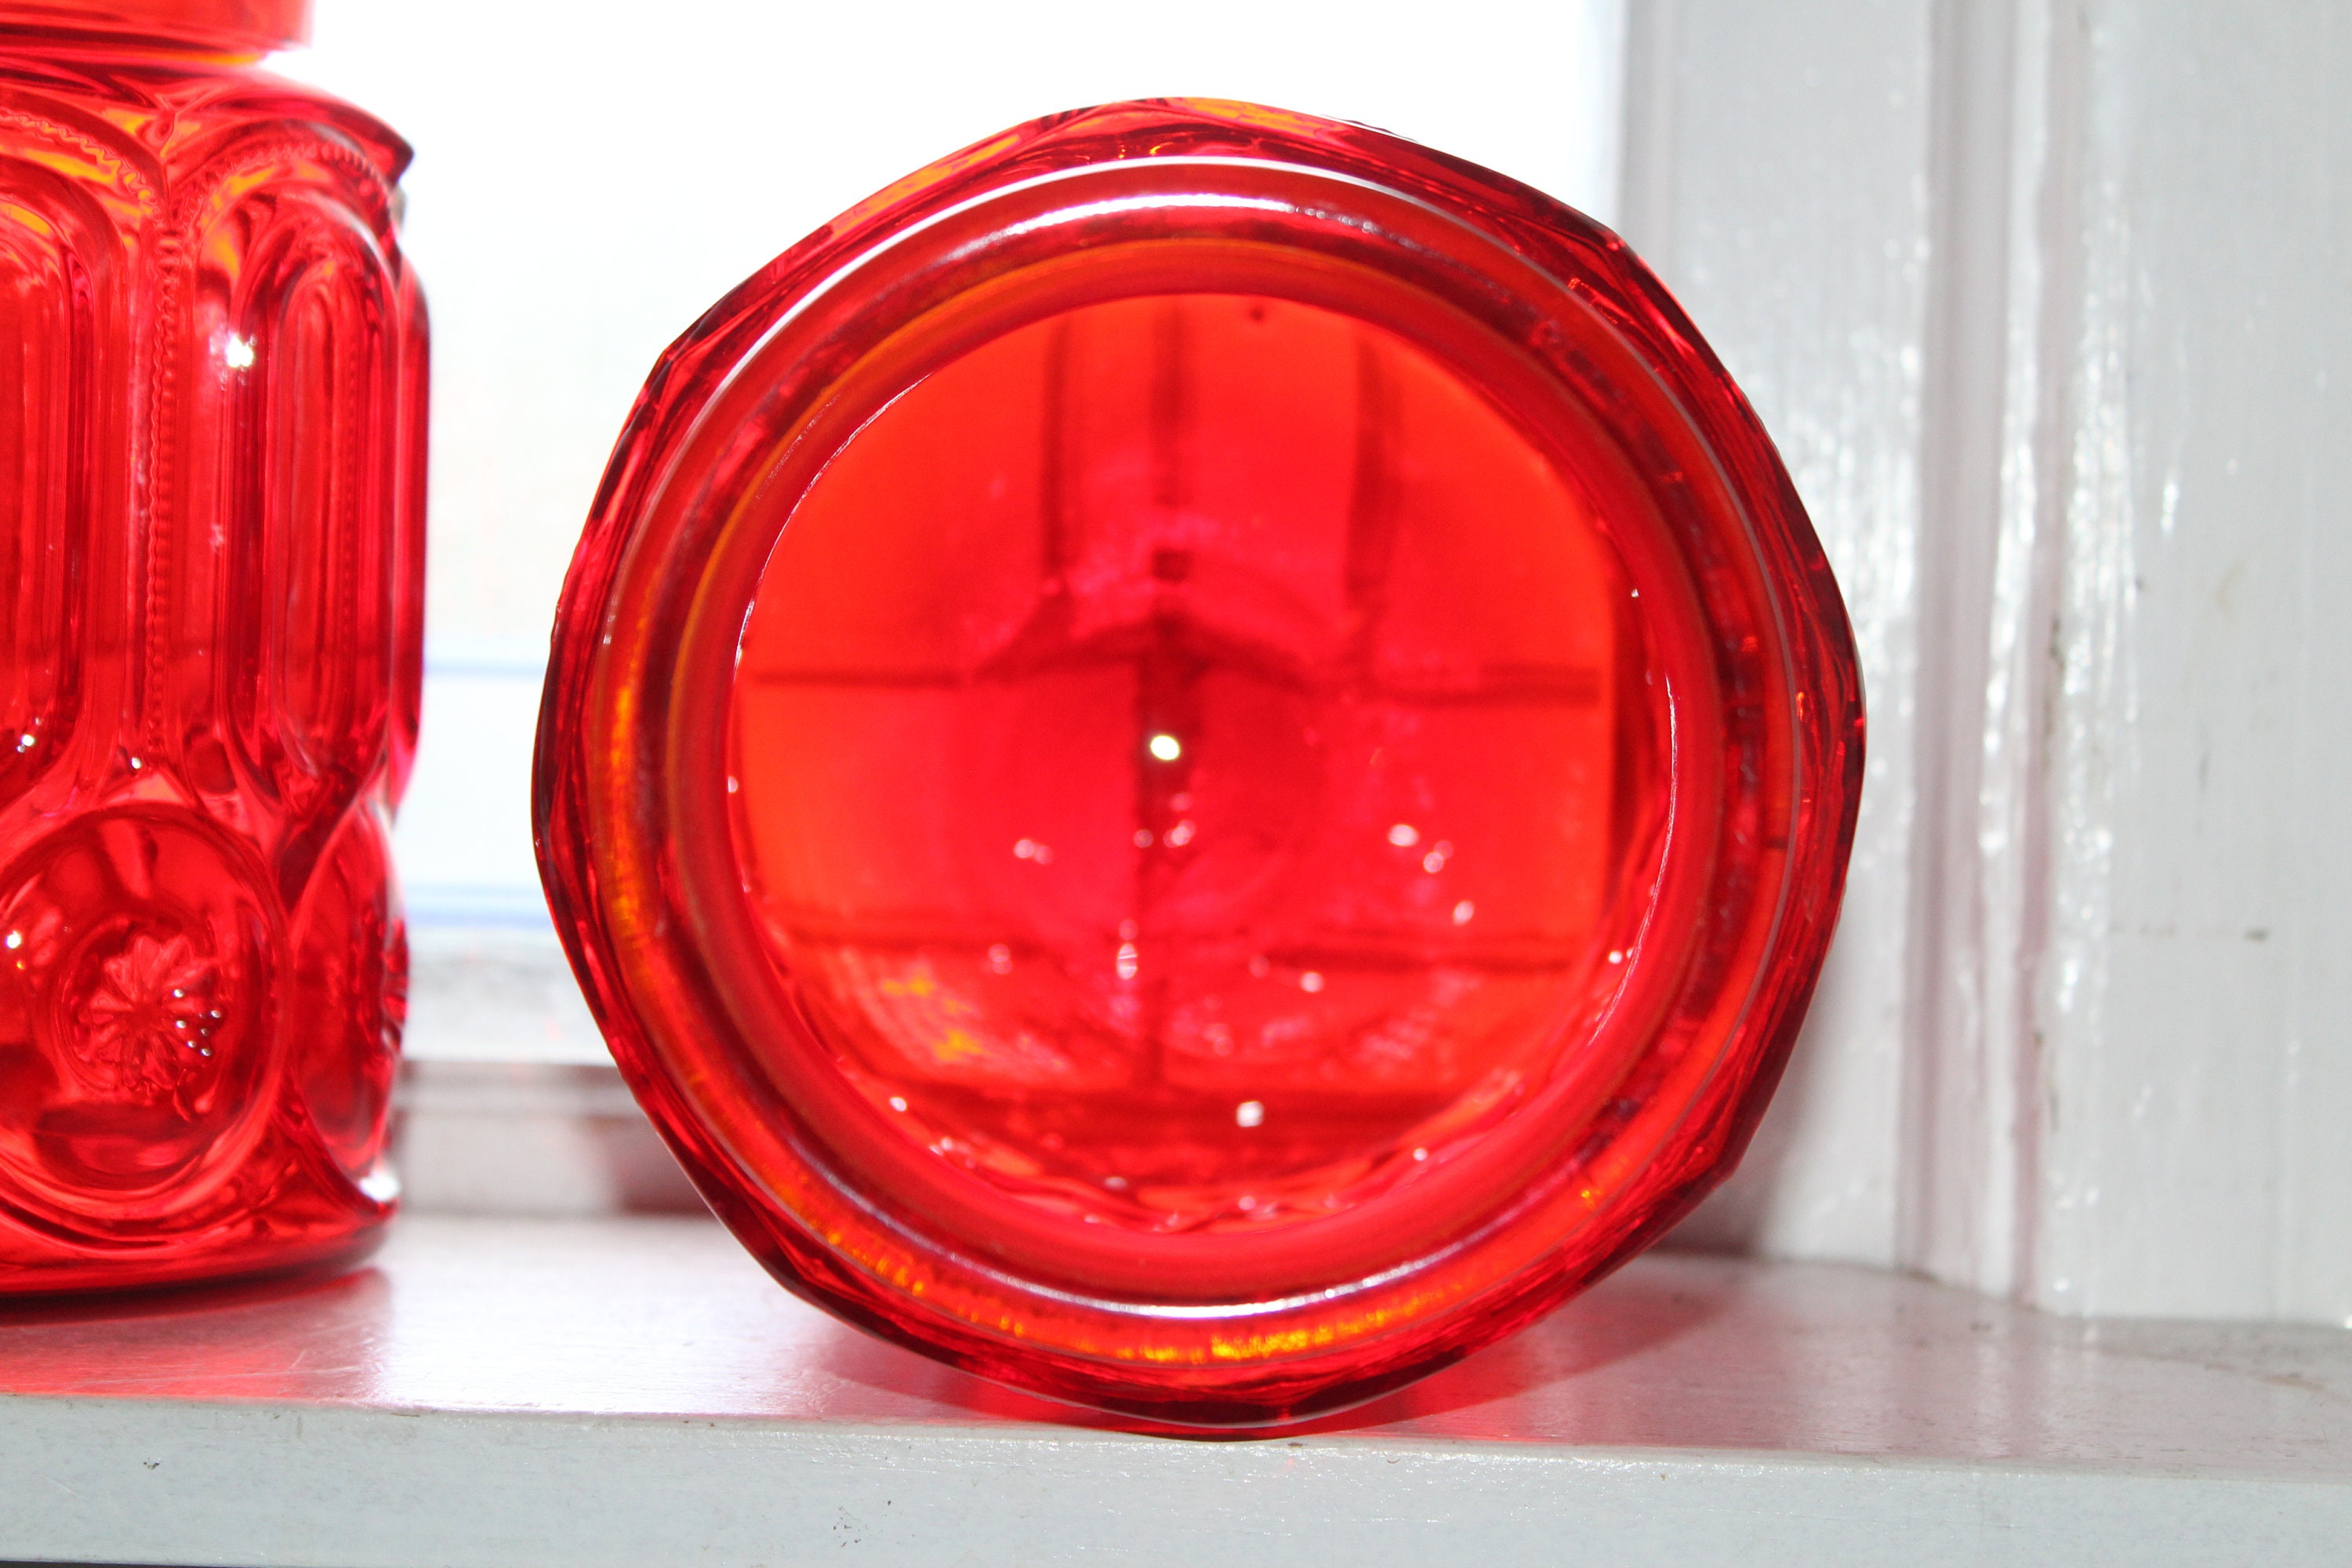 Vintage Red Moon & Star Glass Kitchen Canister Set